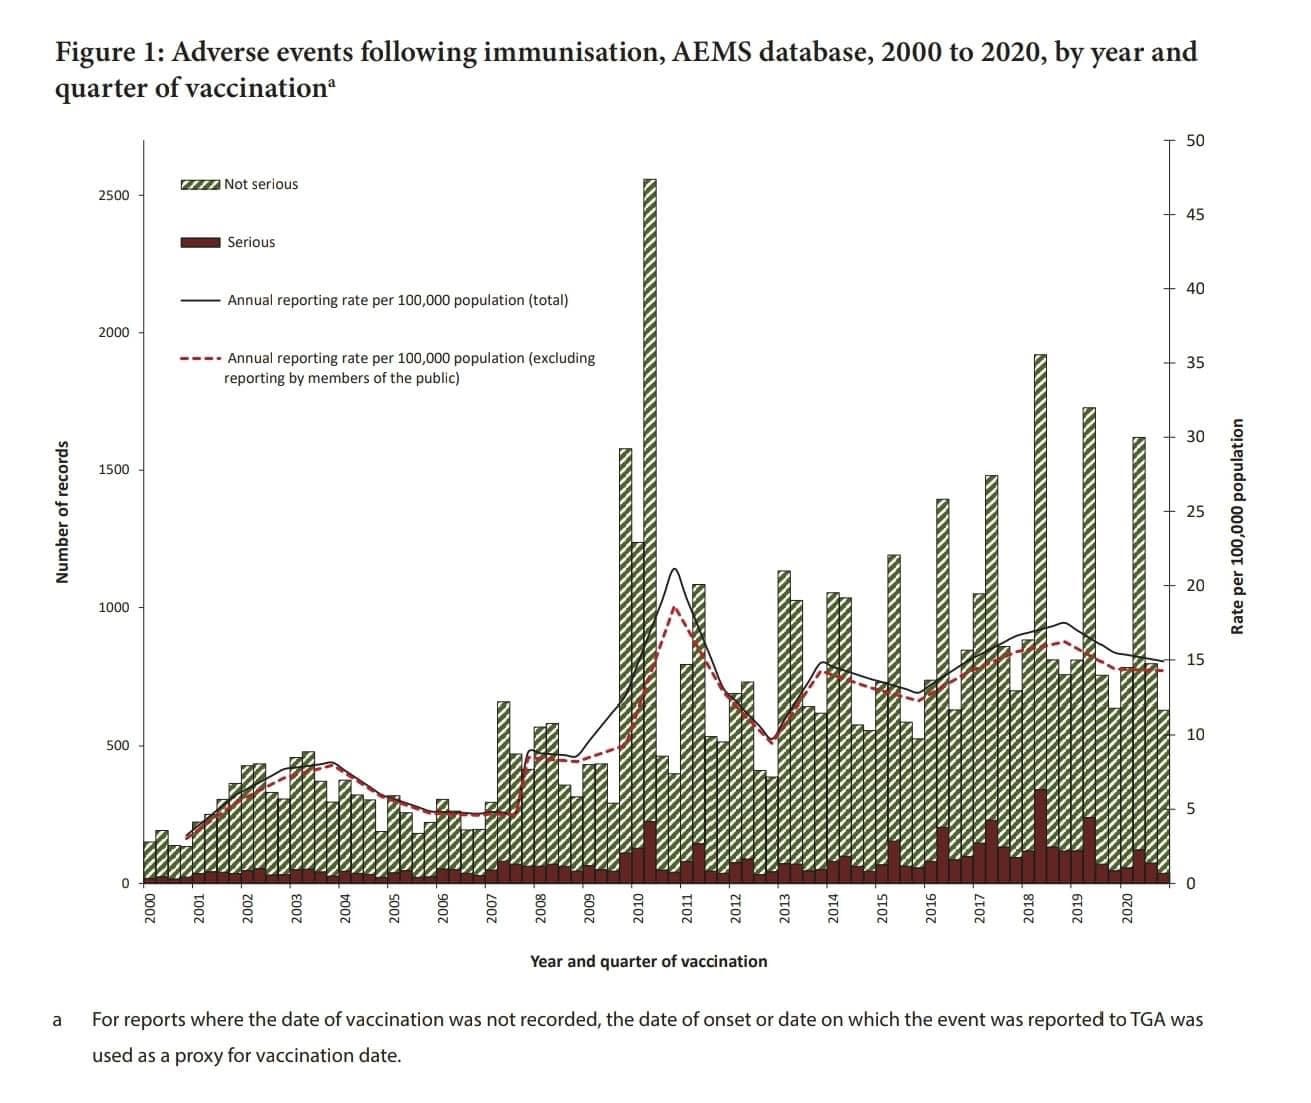 May be an image of text that says "Figure 1: Adverse events following quarter of vaccination" 2500 Z2Z Nots serious AEMS database, 2000 to 2020, by year and Serious 2000 50 reporting rate per 100,000 population (total) reporting rate reporting nemberso 45 00,000 population lexcluding public) 1500 이 40 35 1000 500 30 A Aa 000'00 20 g 15 10 5 100 100 2O 2005 2006 2001 200 a0 201 oe quarter where the date of vaccination was not recorded, the used esa proxy for vaccination date. EXOZ 2014 StOZ 2016 2017 STOZ vaccination 0 στο 0ZOZ onset or date on the to TGA"